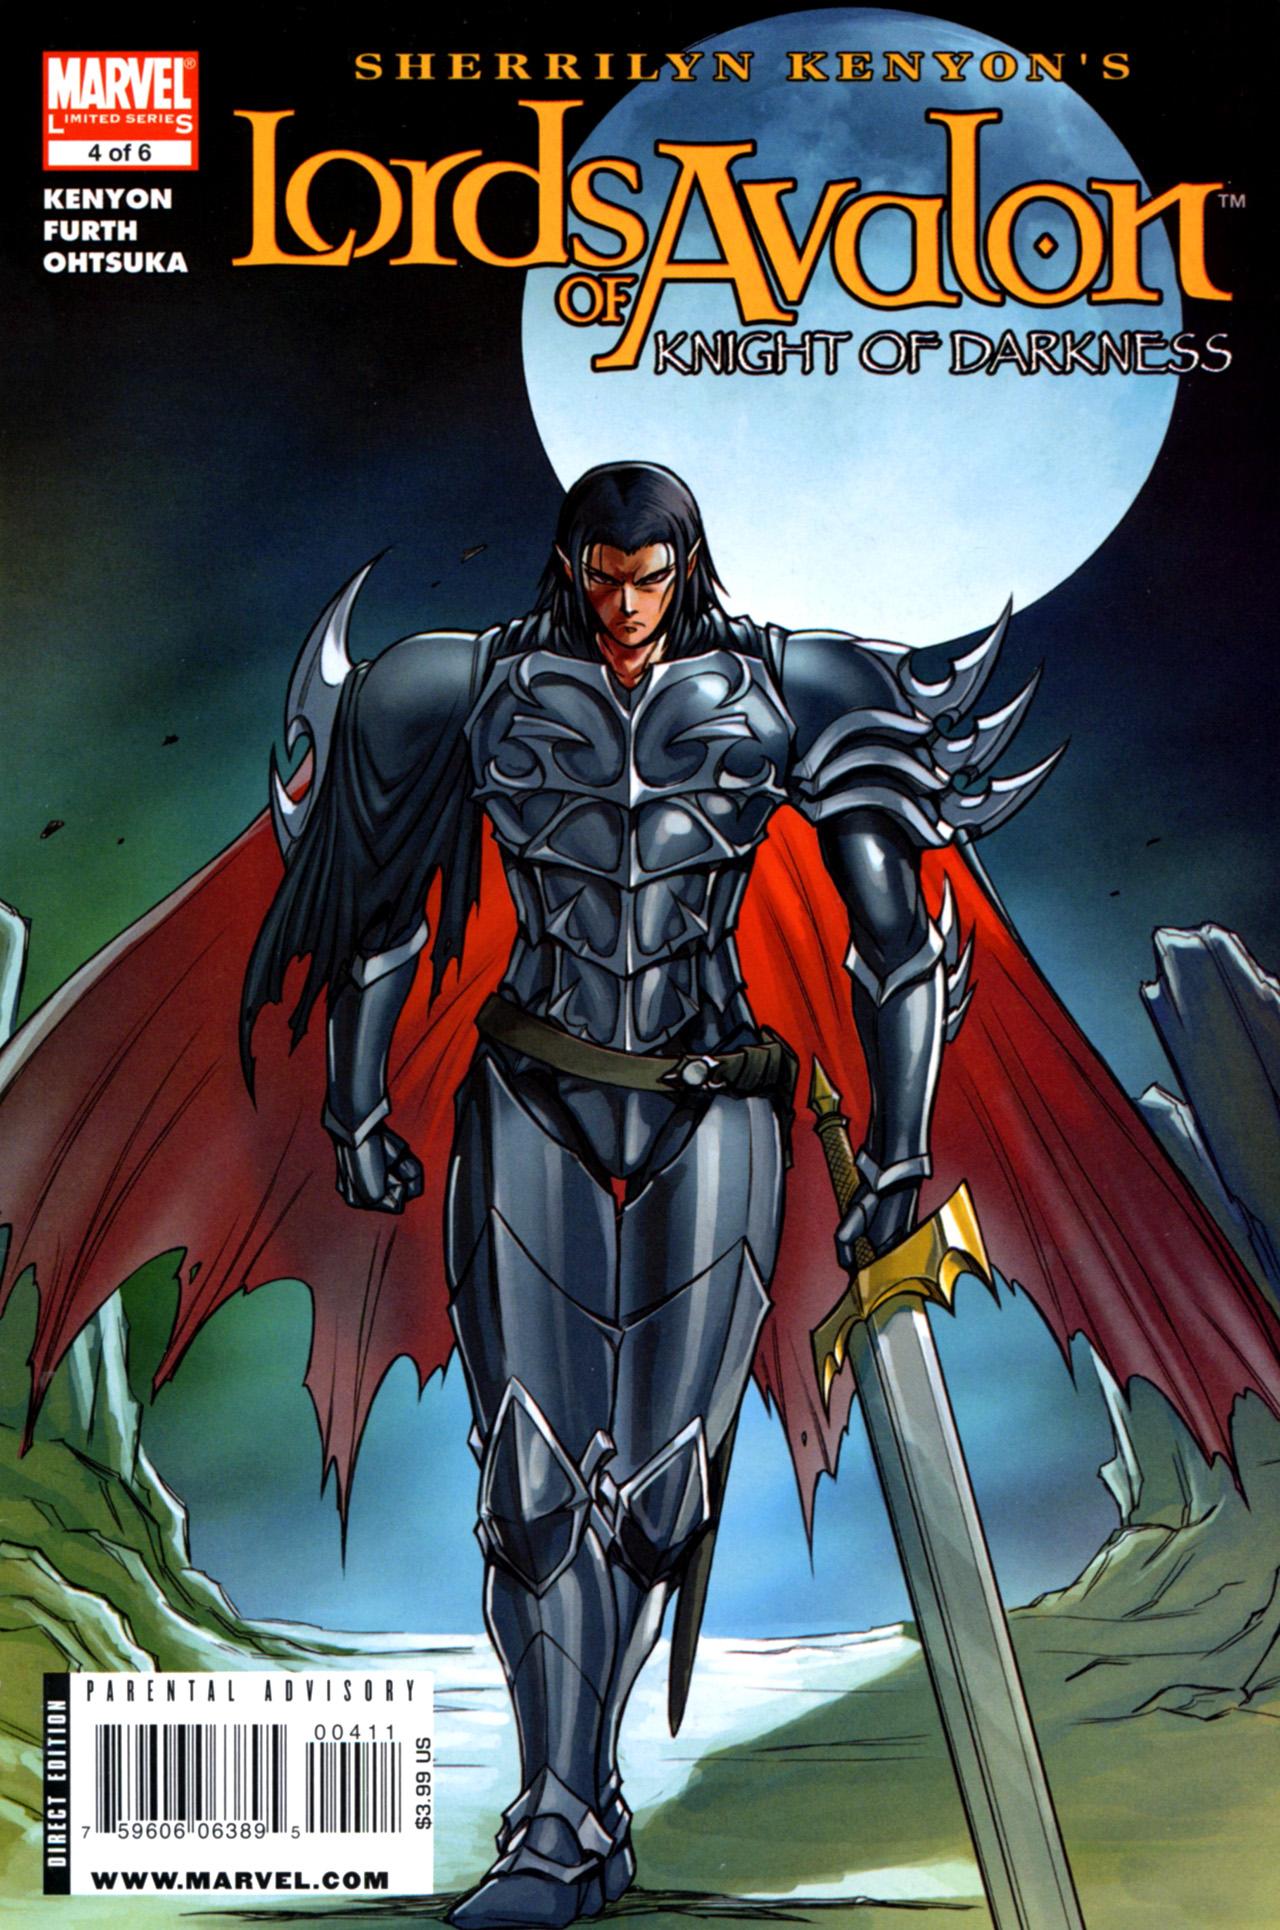 Lords of Avalon: Knight of Darkness Vol. 1 #4